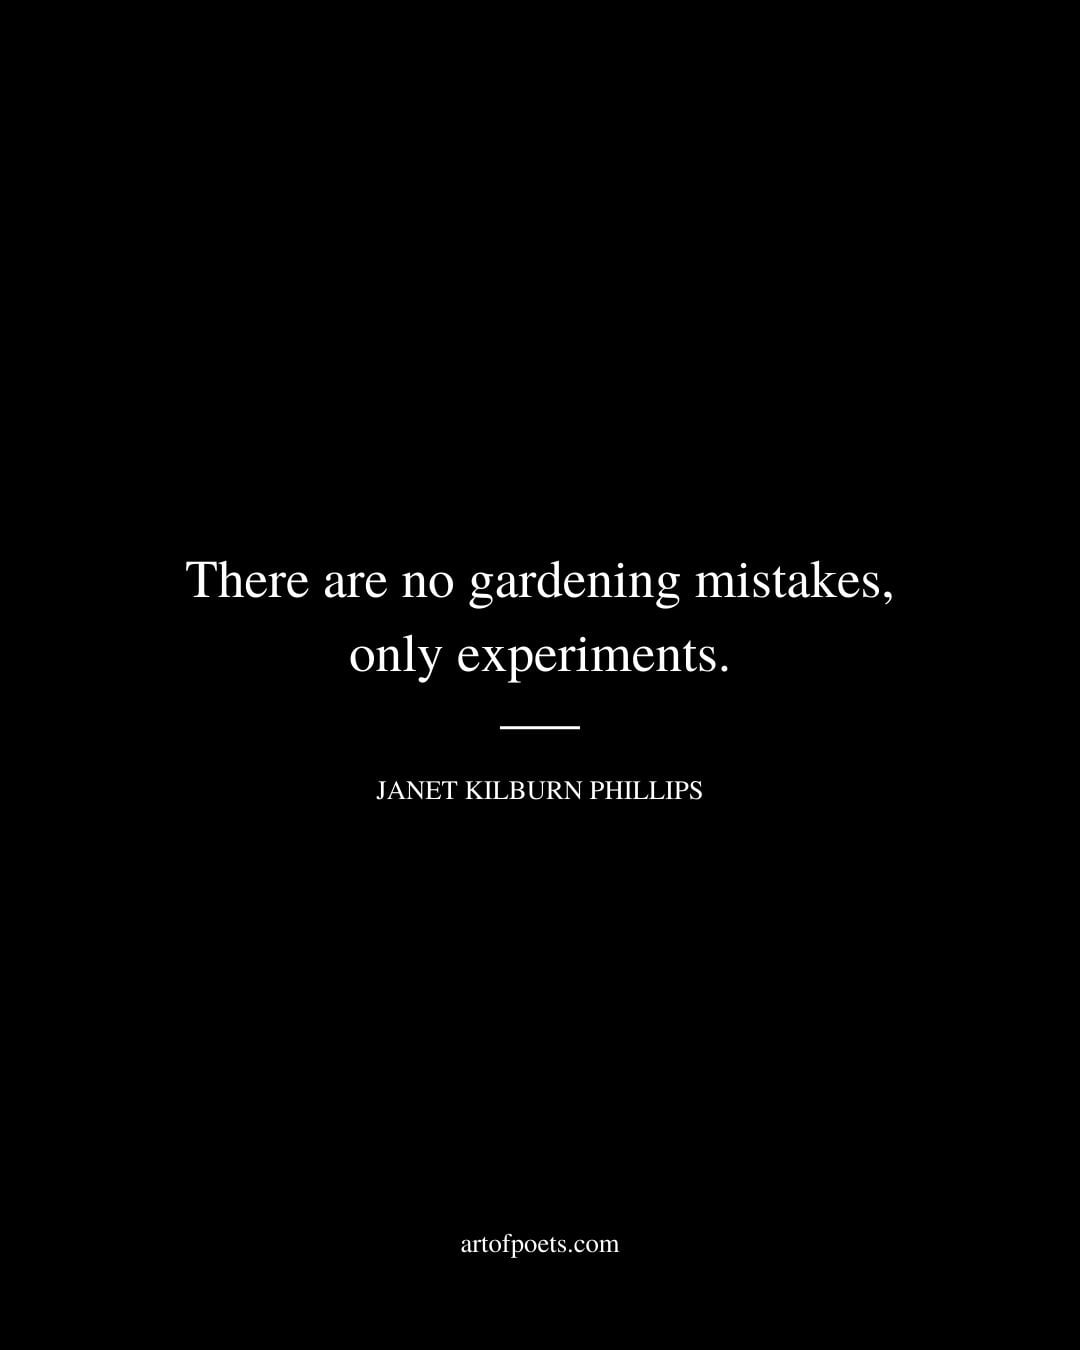 There are no gardening mistakes only experiments. Janet Kilburn Phillips